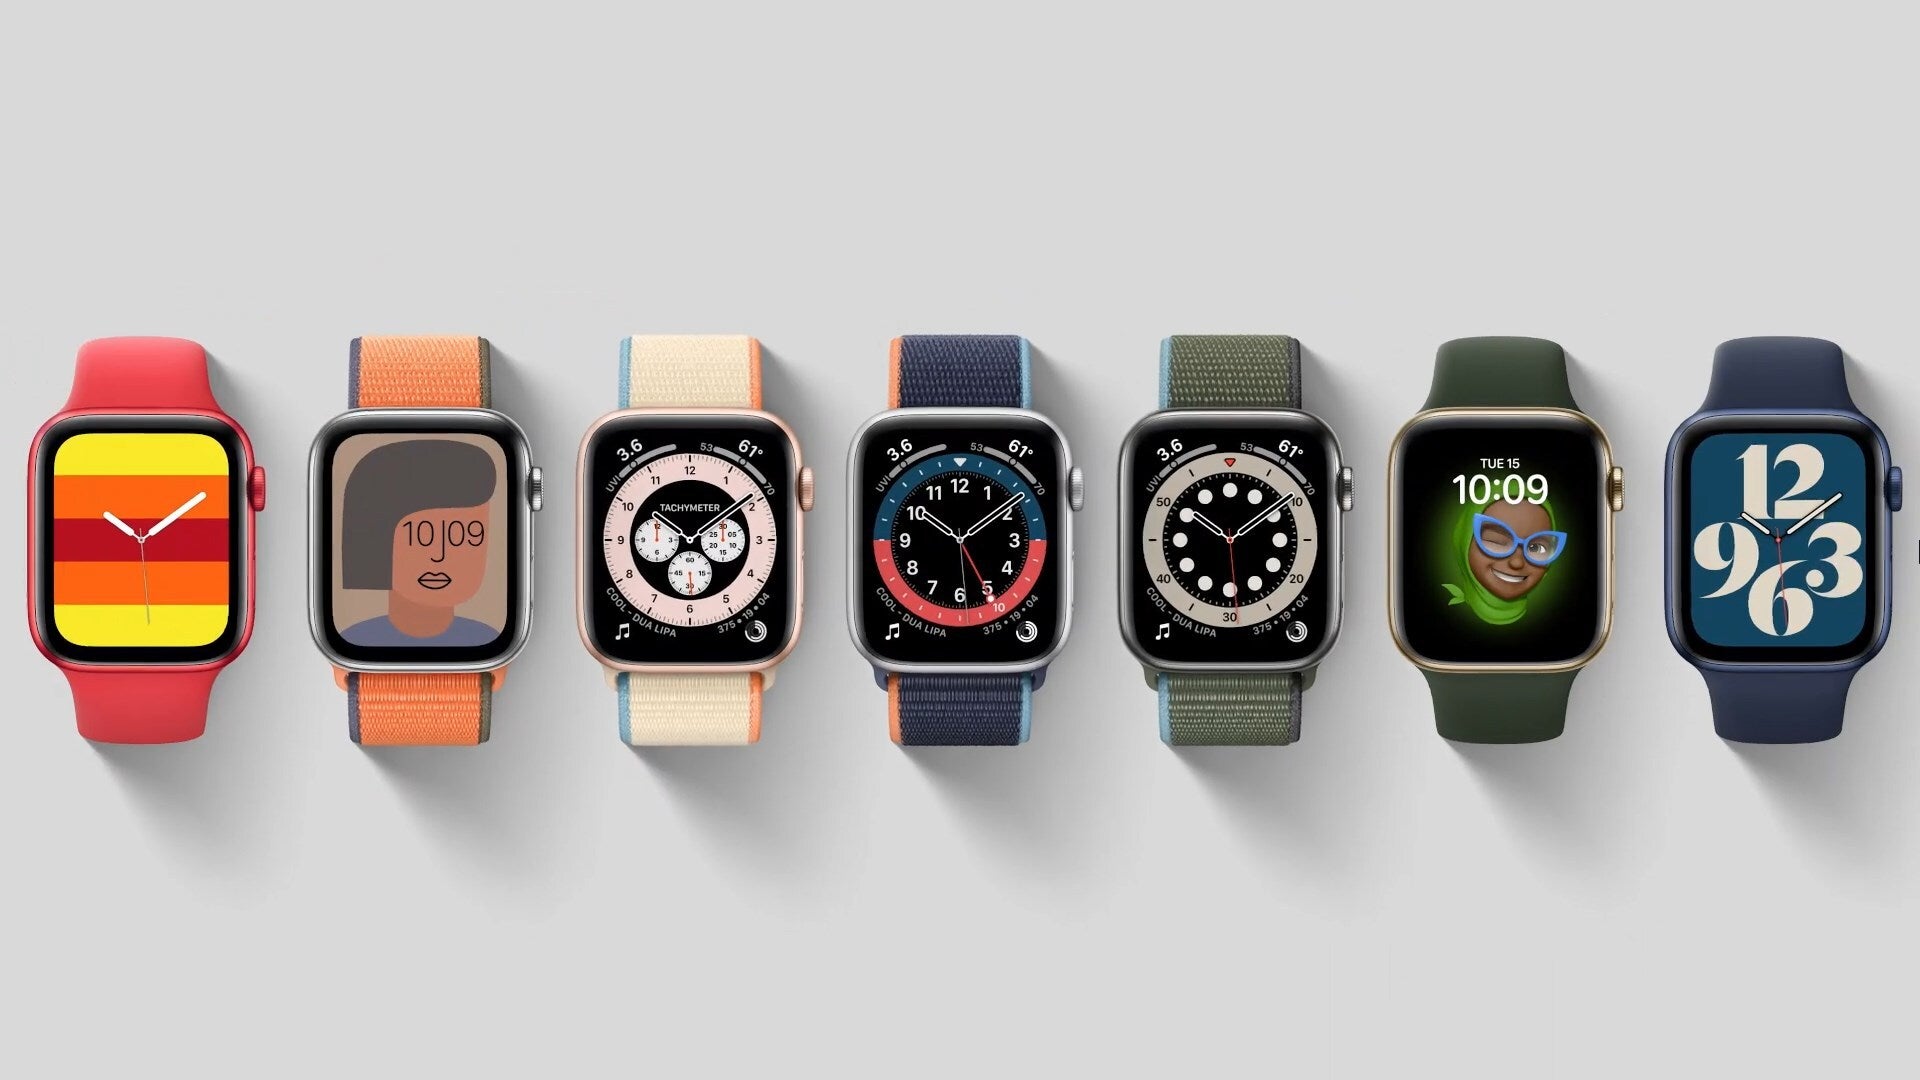 Apple Watch faces come in a wide variety of styles - Apple Watch Series 6 vs Samsung Galaxy Watch 3: clash of the flagship smartwatches